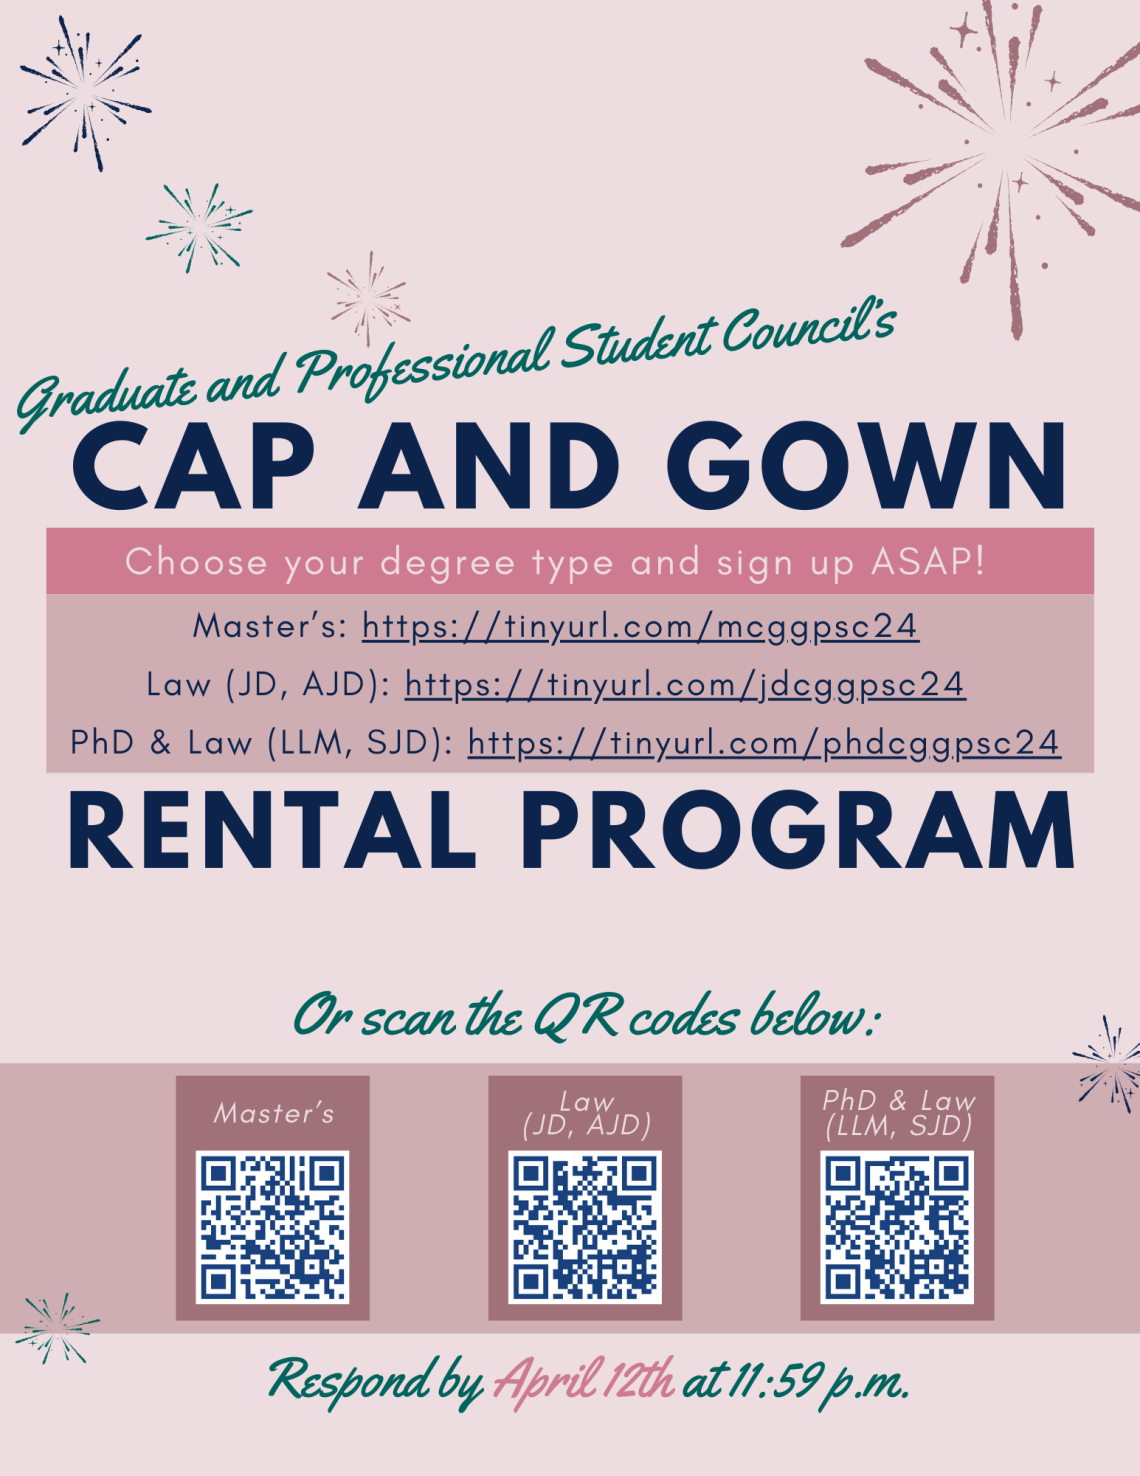 GPSC's Cap and Gown Rental Program